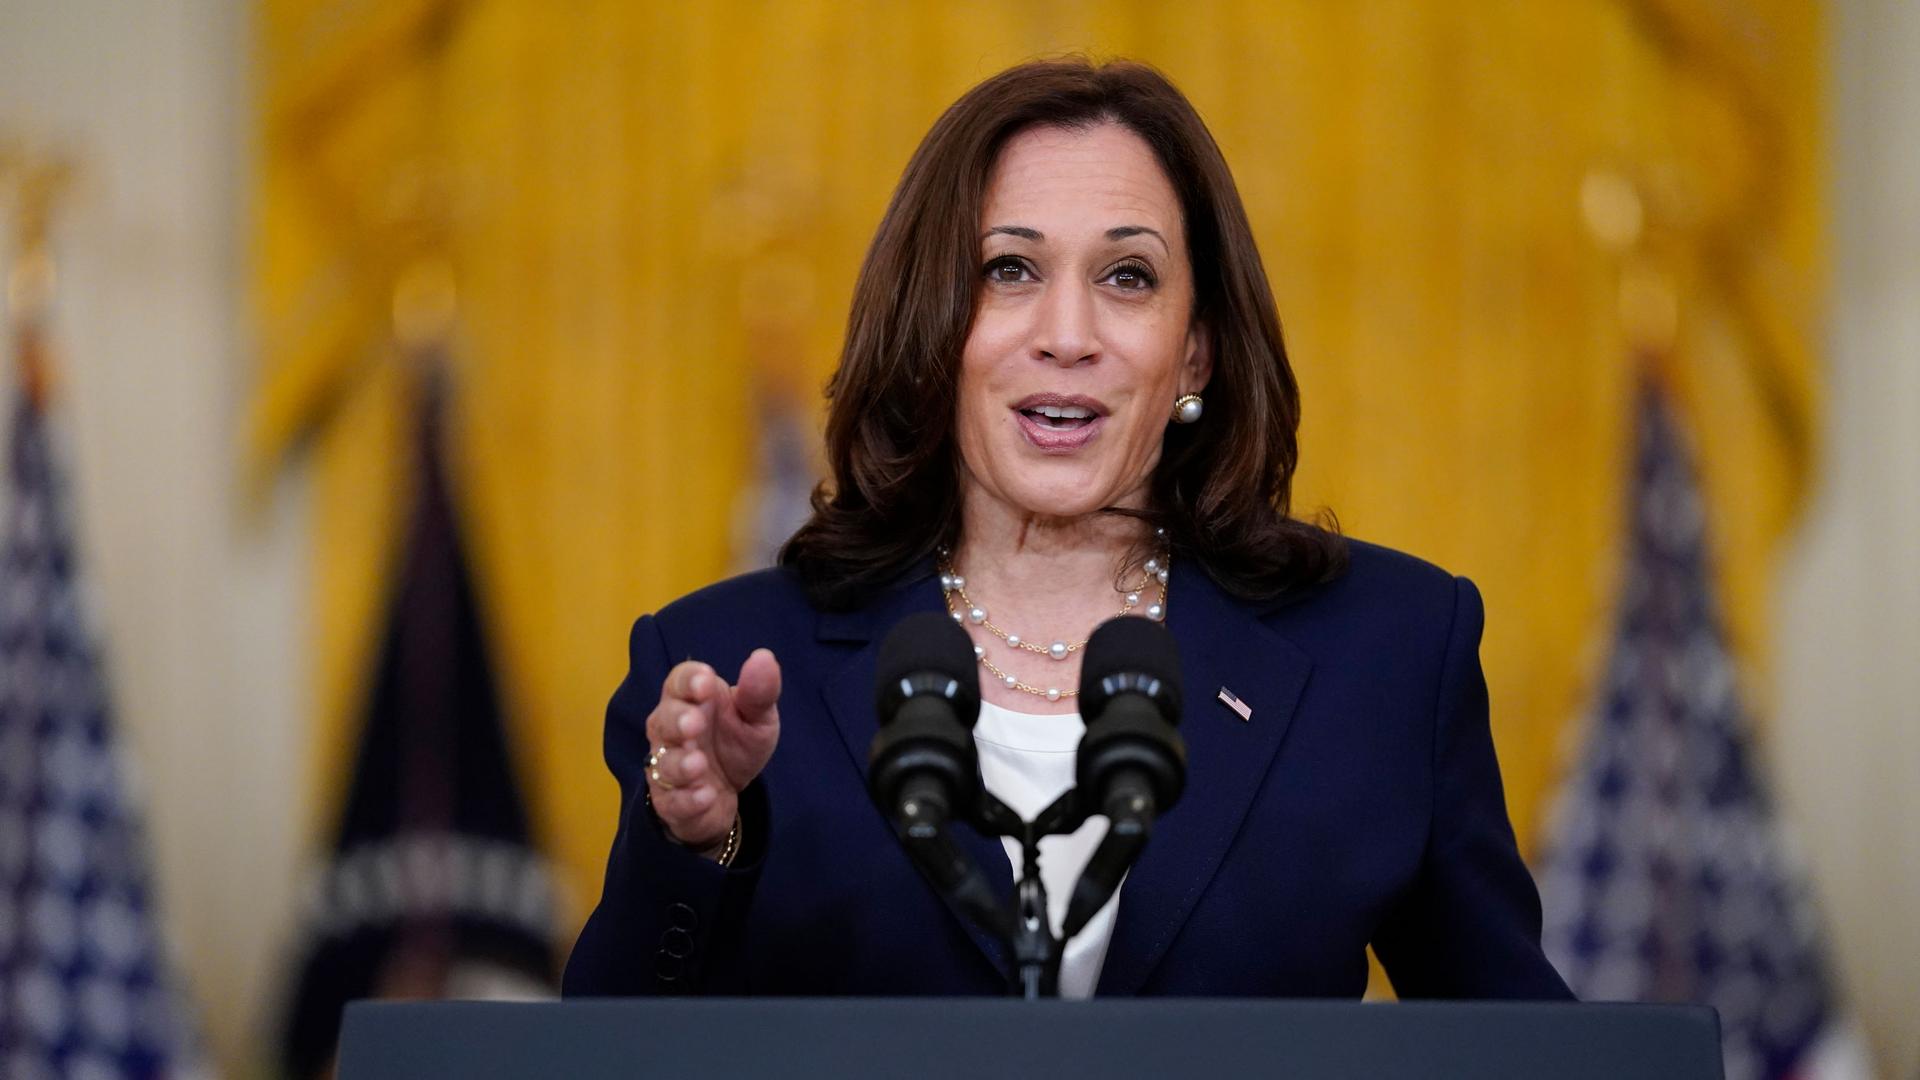 Vice President Kamala Harris is shown standing at a podium with two microphones and her right hand pointing forward.